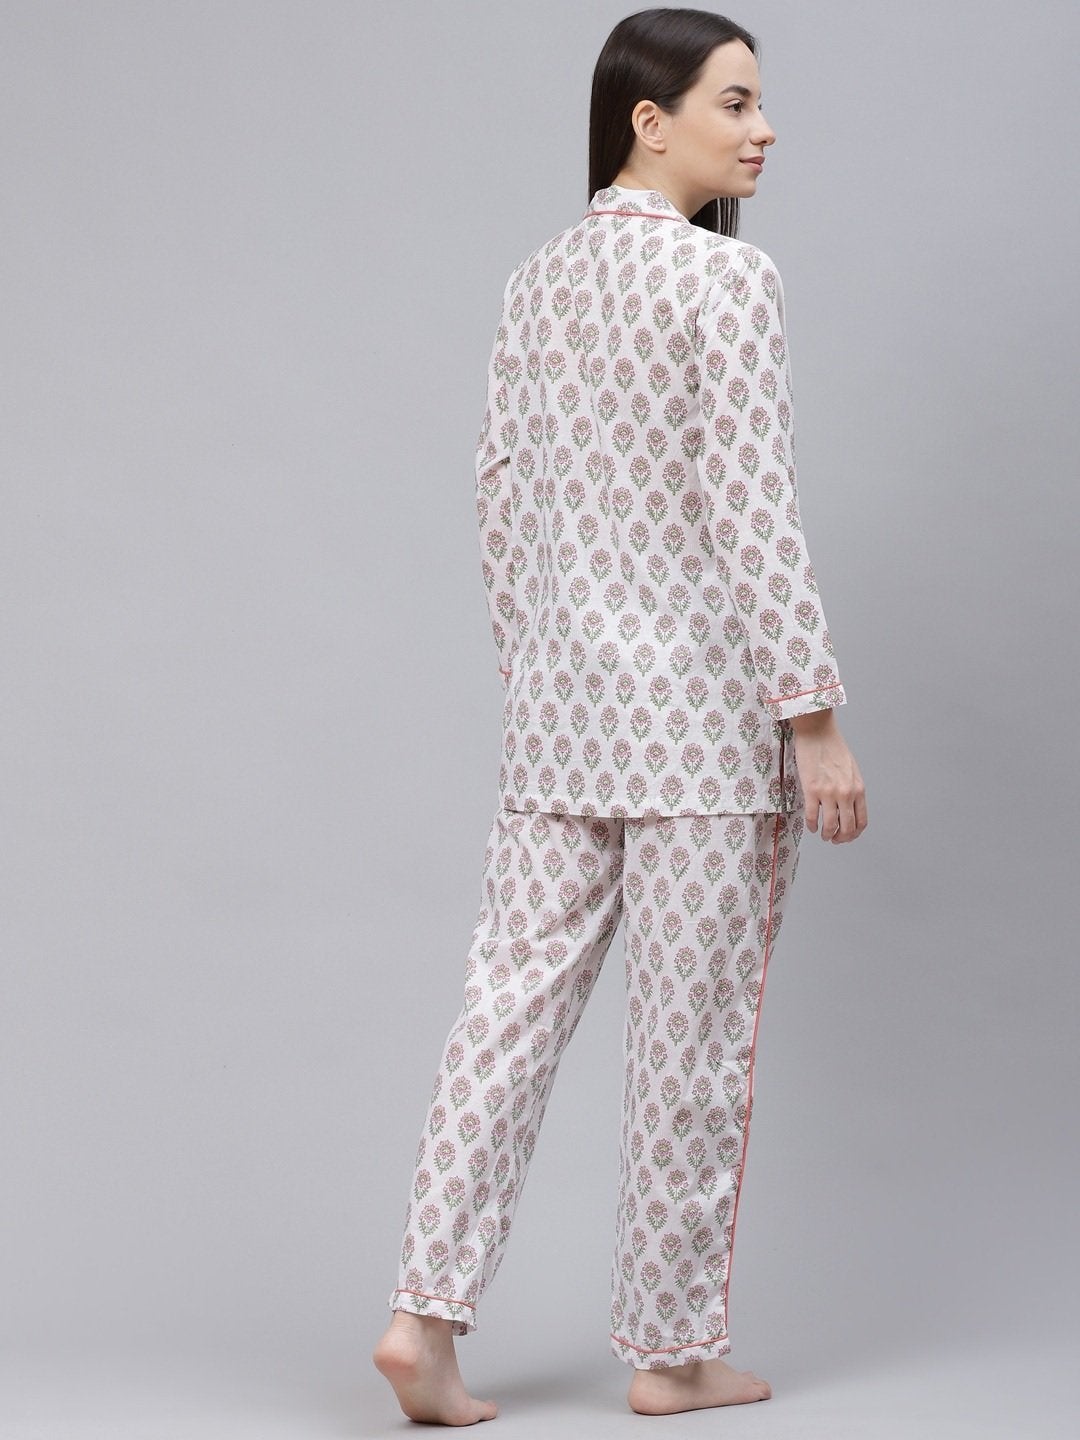 Women's The Dressify White Printed Cotton Night Suit - Divena